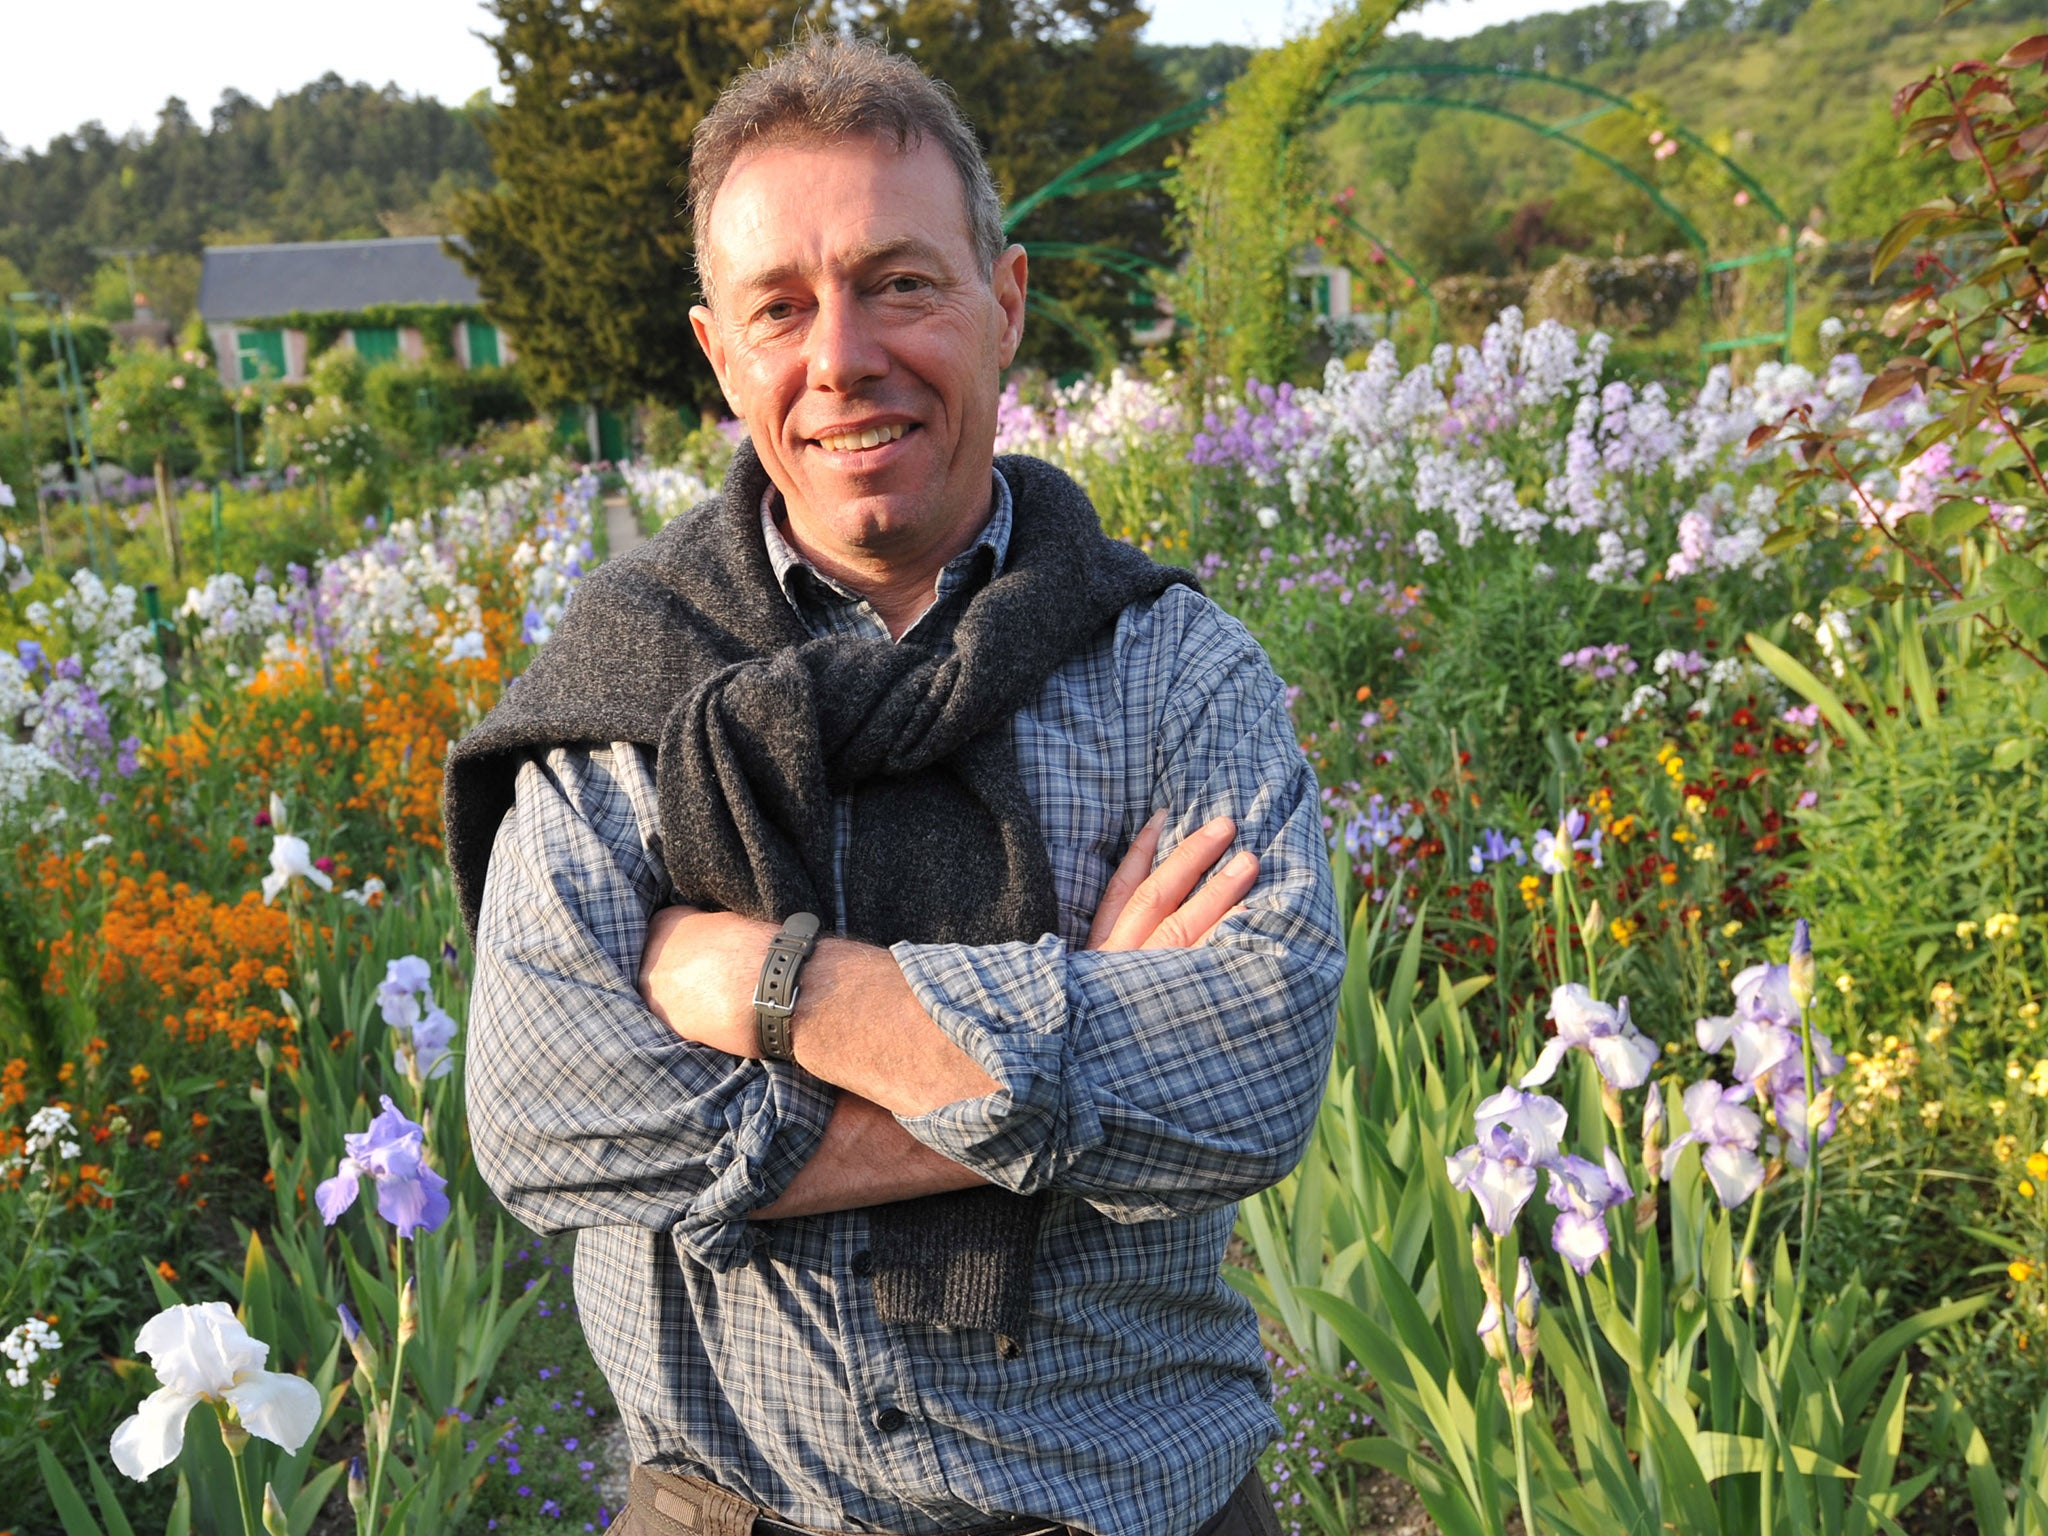 New English head gardener James Priest at Monet's garden, Giverny, Normandy, France - 05 May 2011